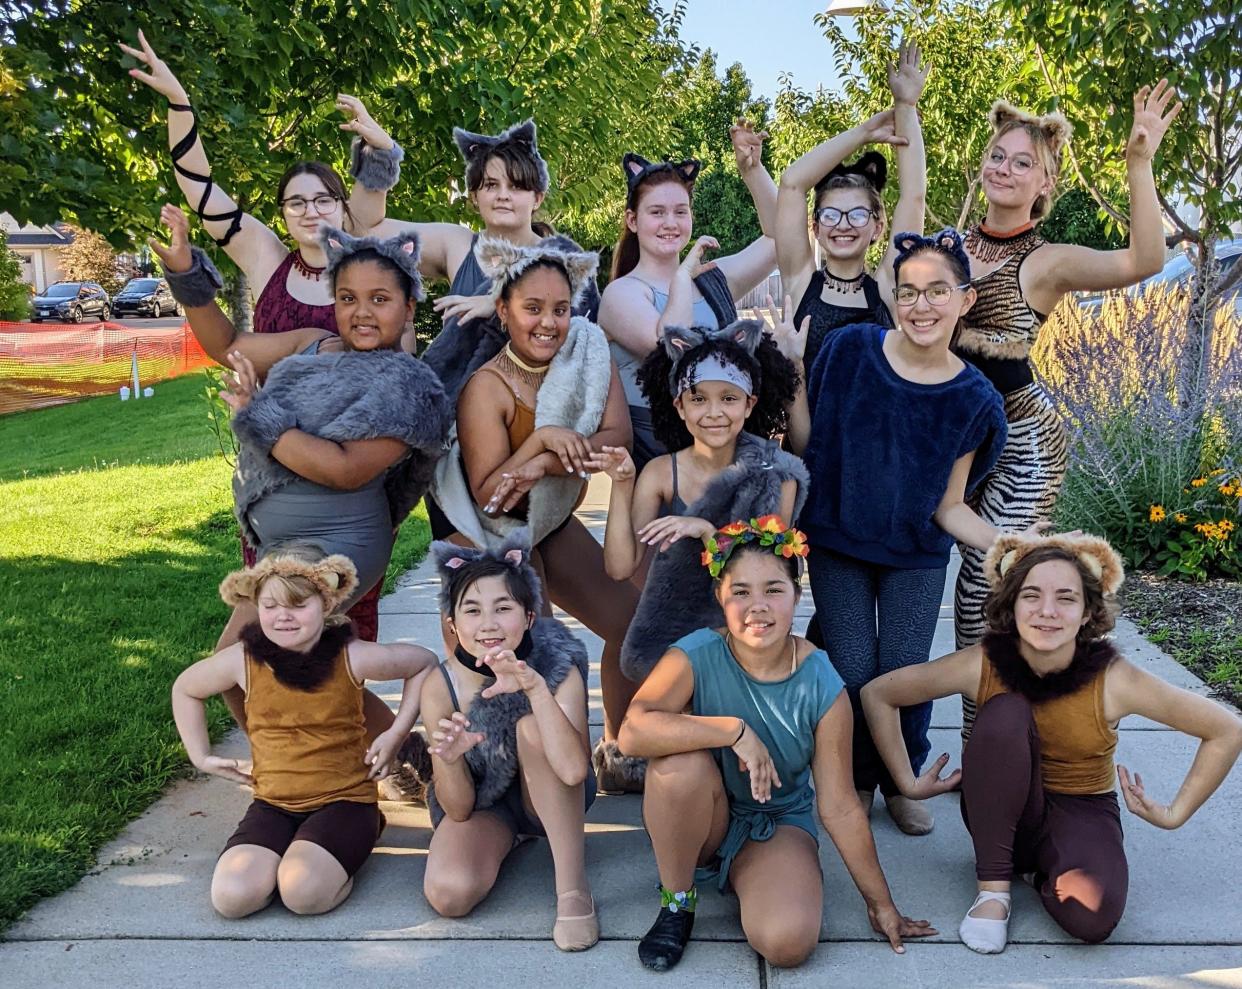 Dance United will provide a re-telling of "The Jungle Book," incorporating multiple dance styles like ballet and jazz, as well as a variety of music — including a couple of classic favorites.